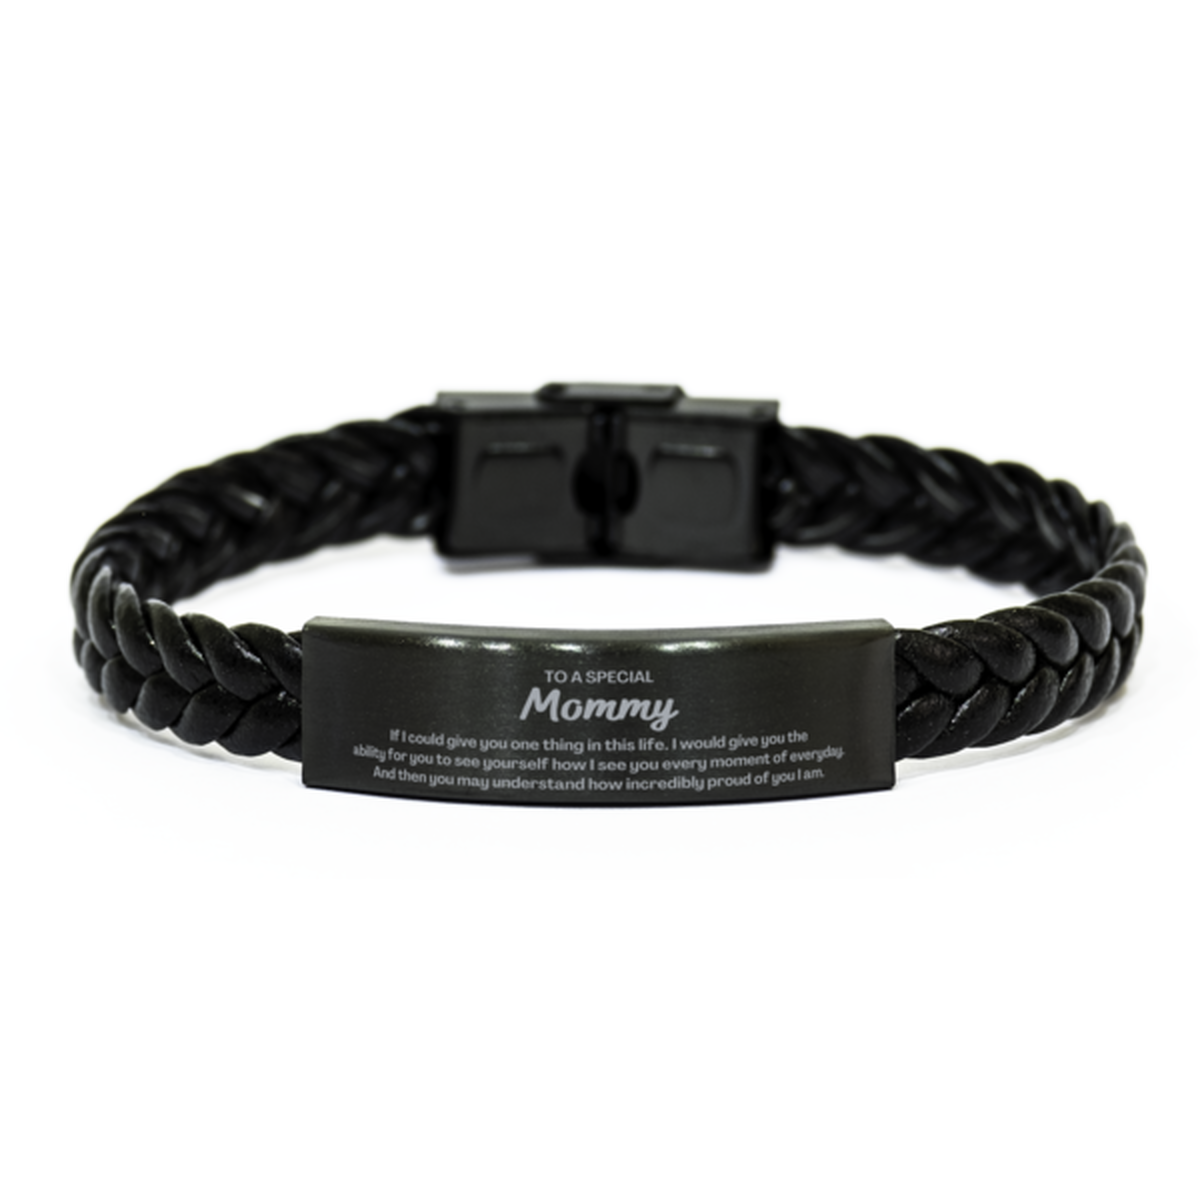 To My Mommy Braided Leather Bracelet, Gifts For Mommy Engraved, Inspirational Gifts for Christmas Birthday, Epic Gifts for Mommy To A Special Mommy how incredibly proud of you I am